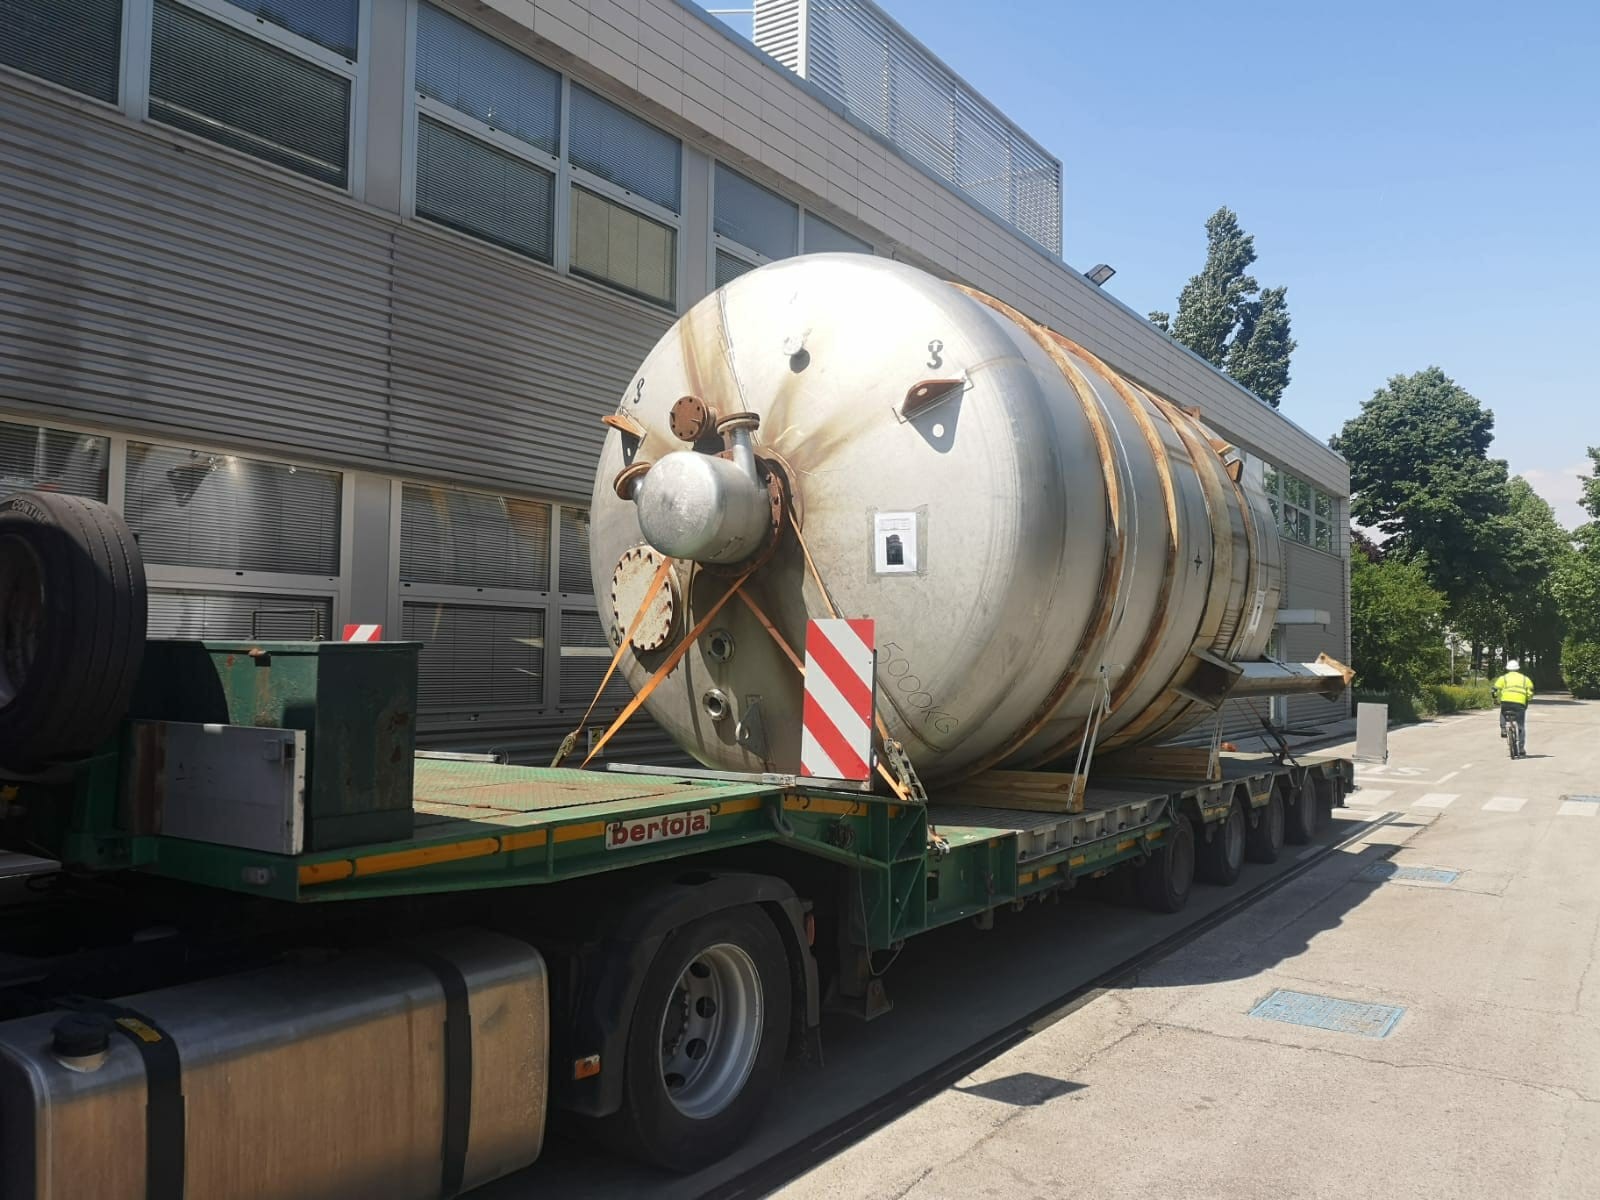 7WL is moving chemical plant from Italy to India